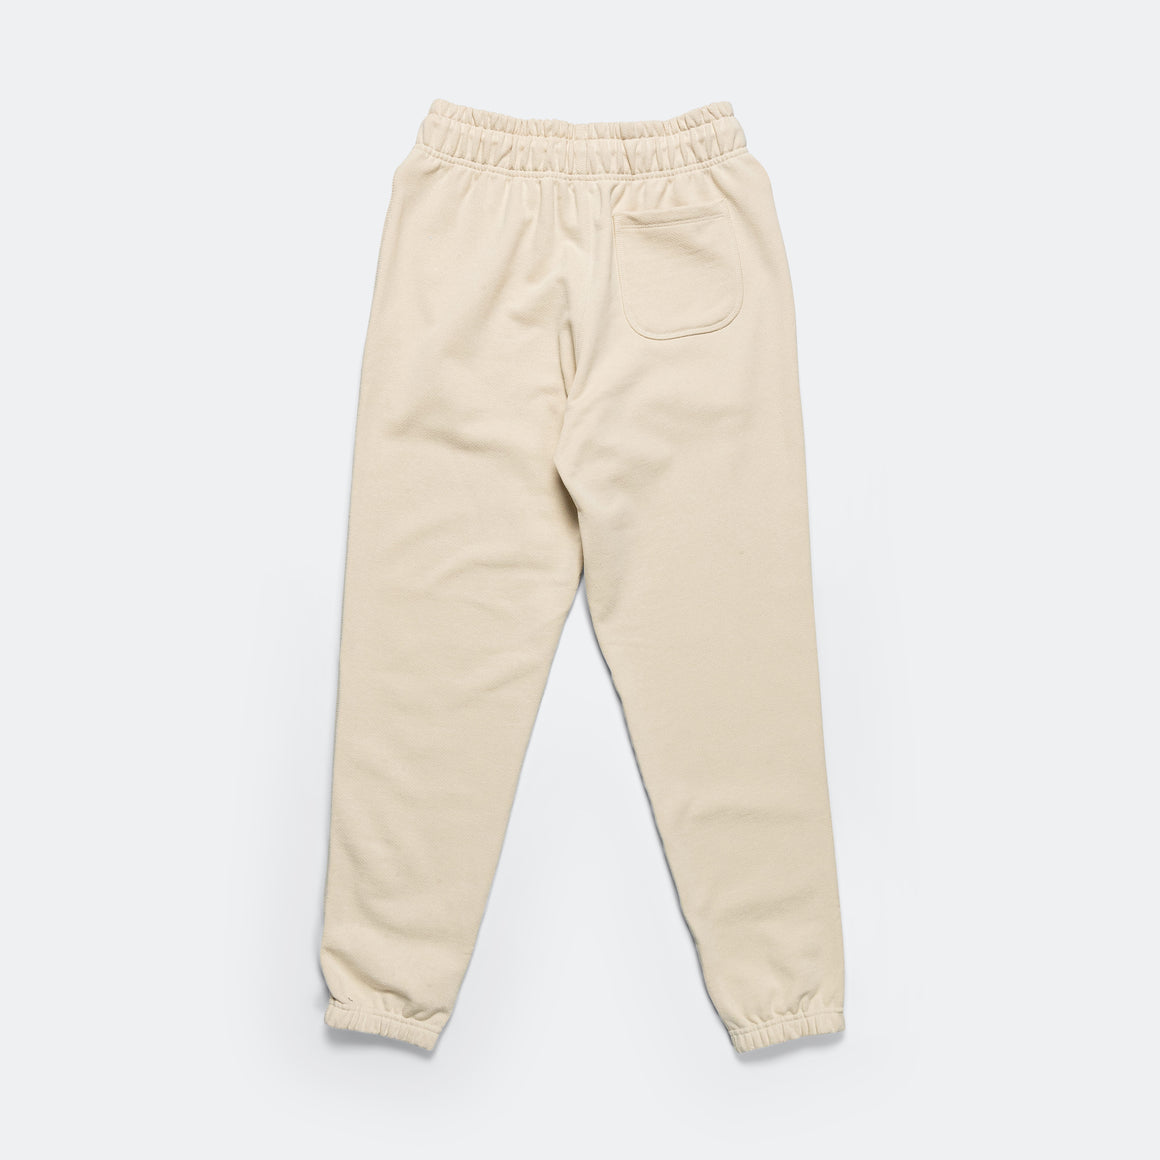 New Balance - MADE in USA Core Sweatpant - Sandstone - UP THERE